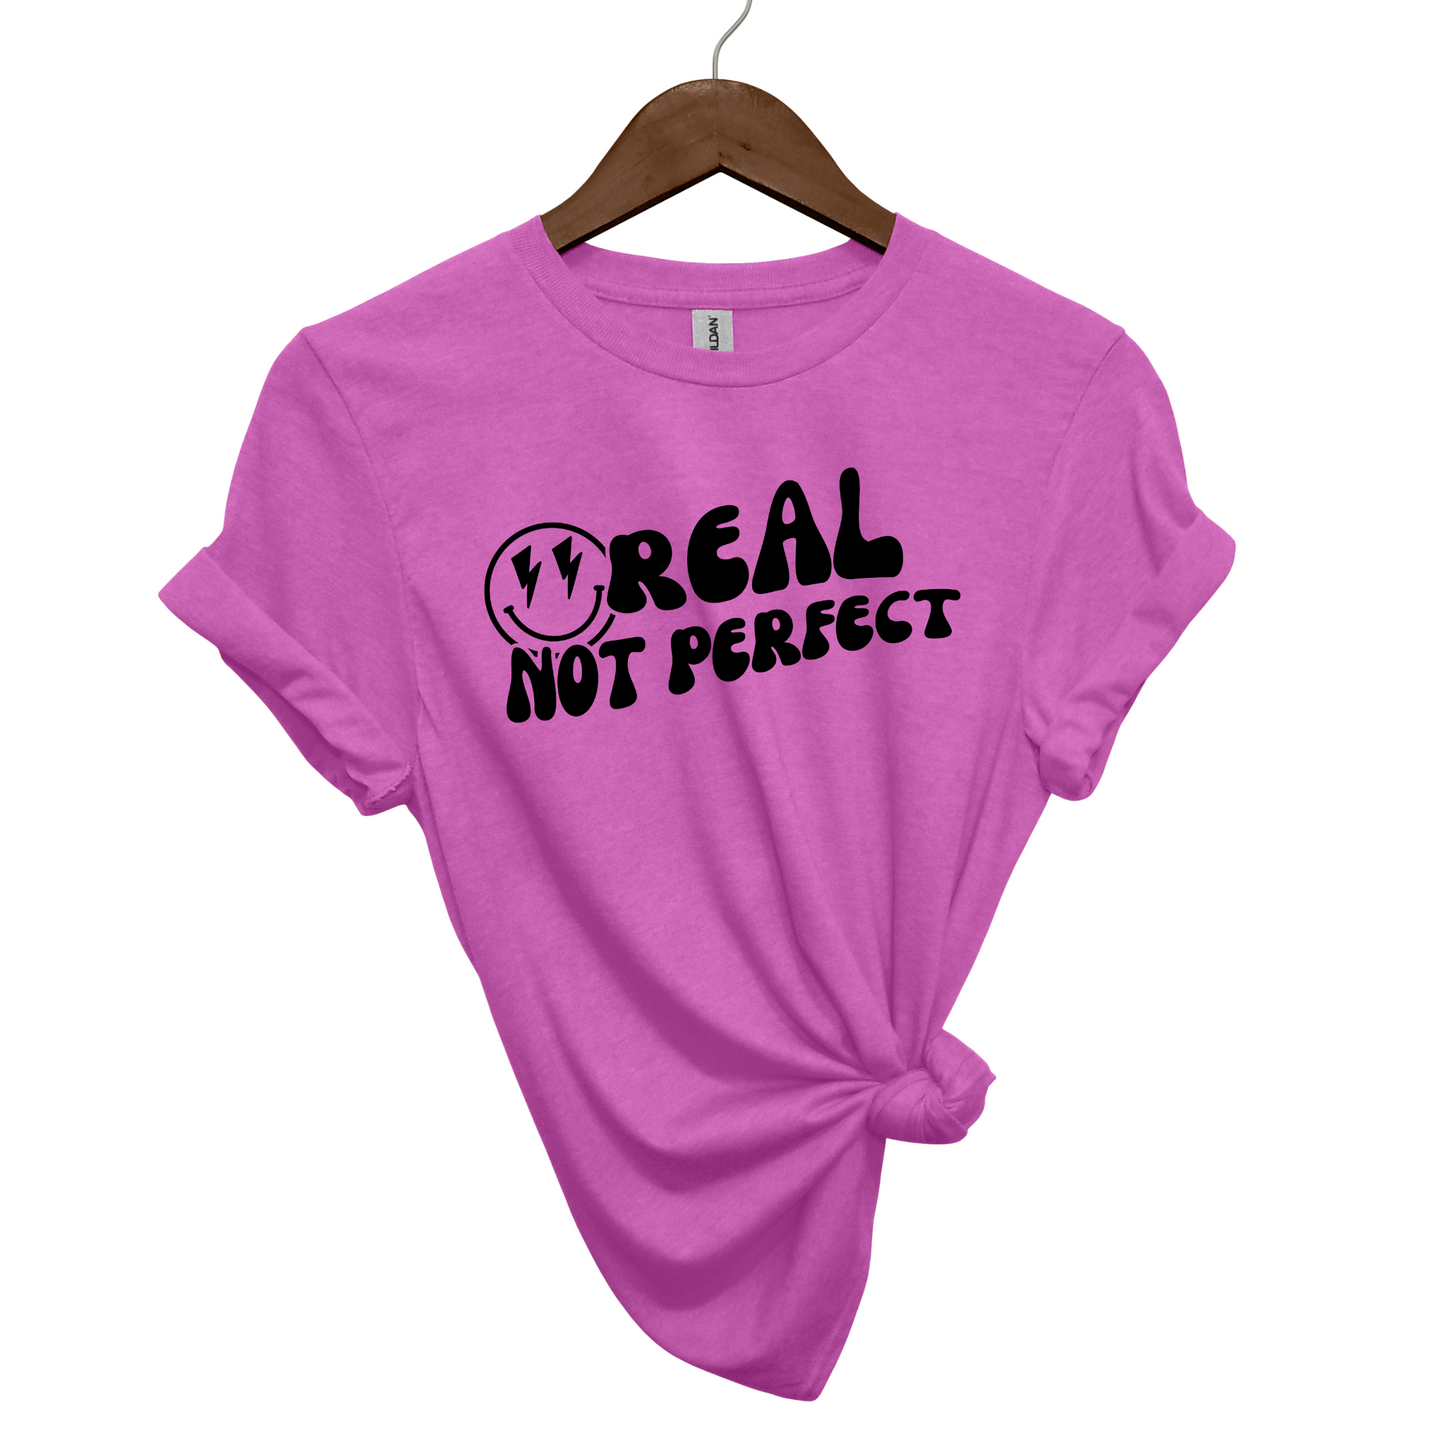 Real, Not Perfect Crewneck T Shirt heather orchid